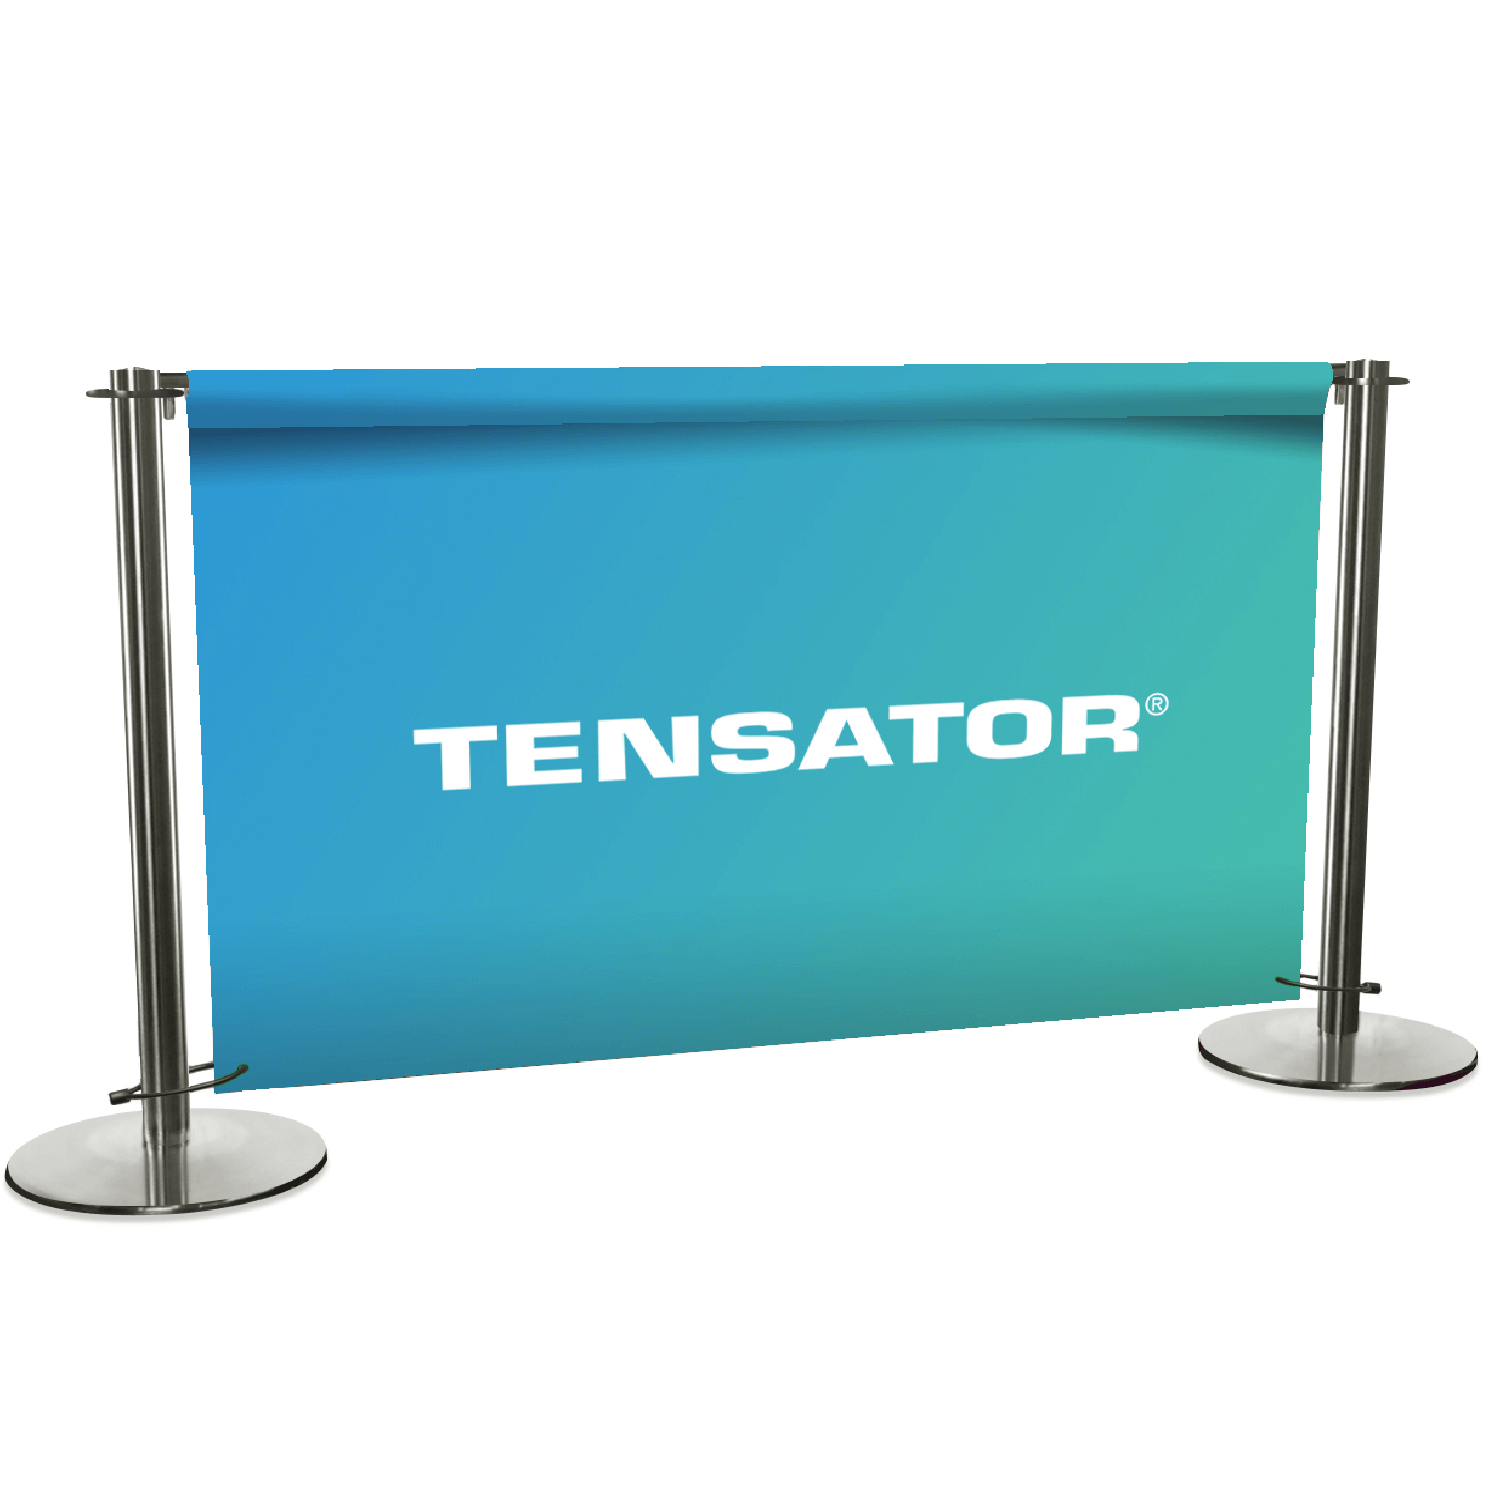 Cafe banner with the tensator logo. An example of how you can customise your banners with your own design and logo